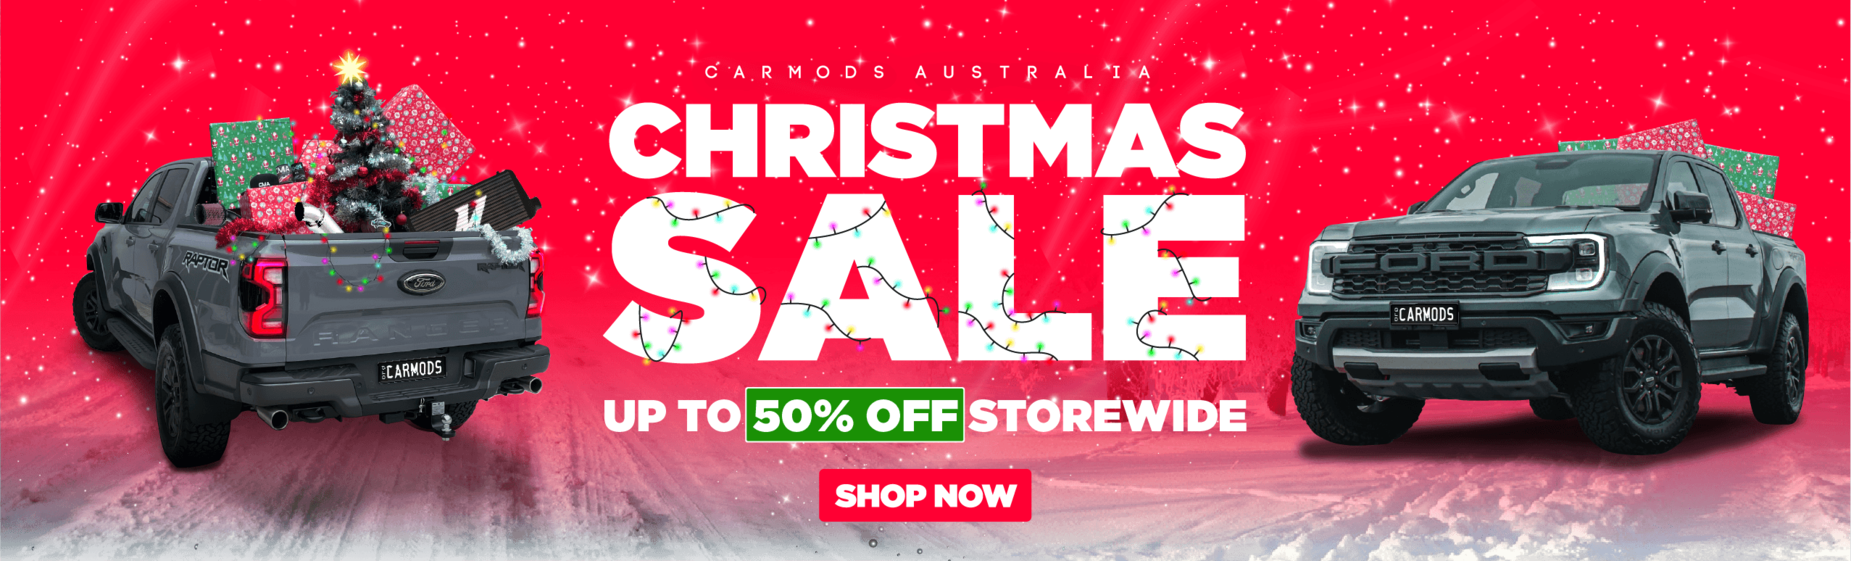 Shh, Up to 50% OFF sale + extra $35 OFF $600+ spend with coupon @ Car Mods Australia